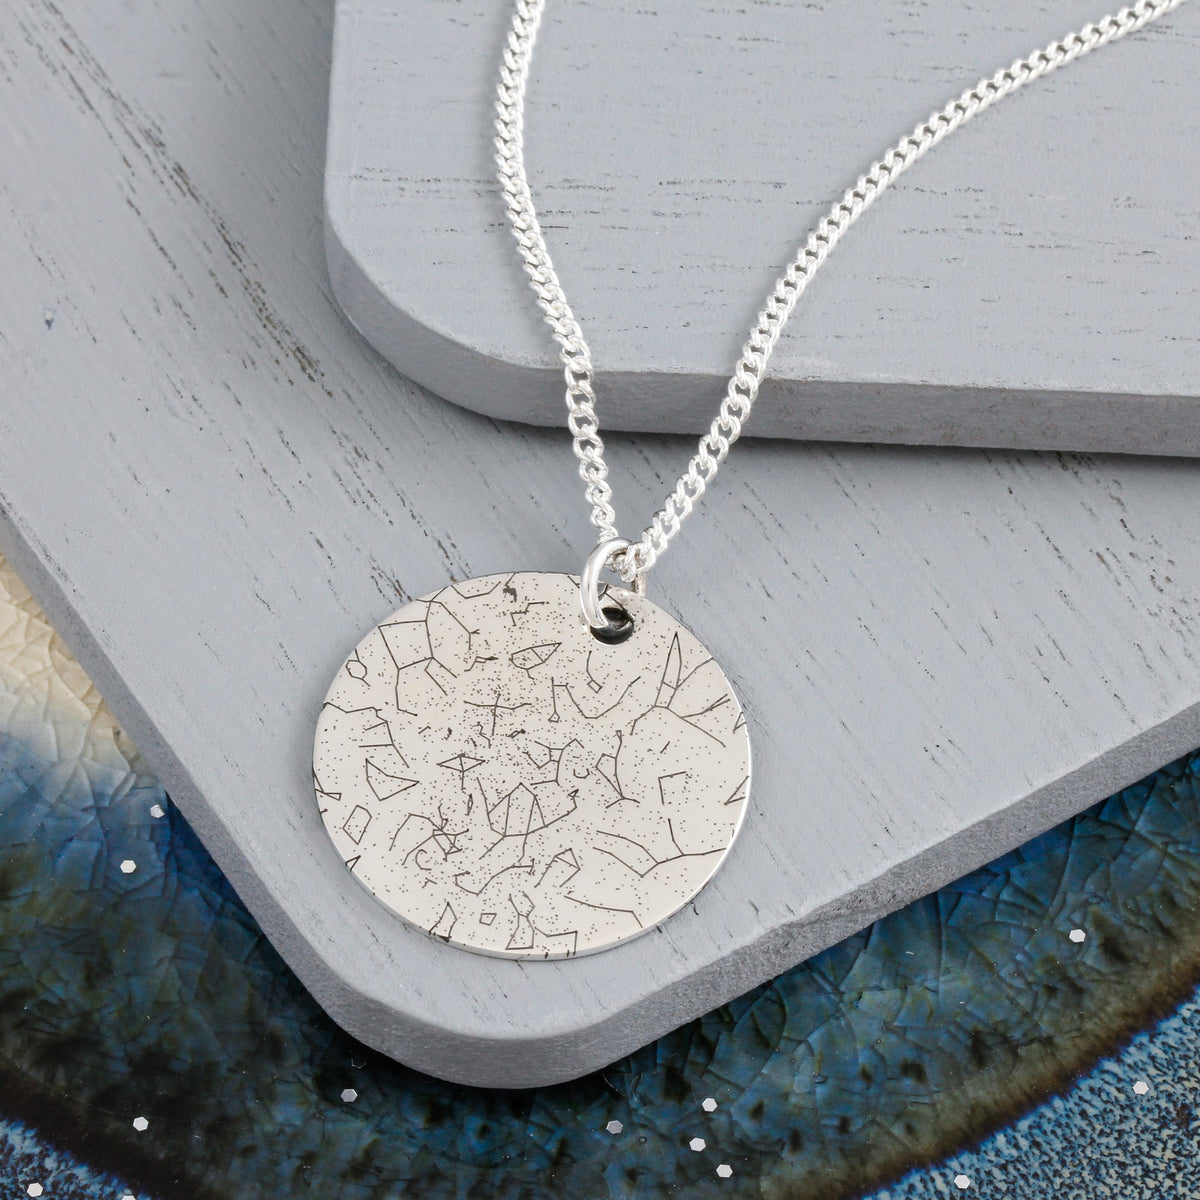 Bespoke Star Map Constellation Necklace - 25mm Disc